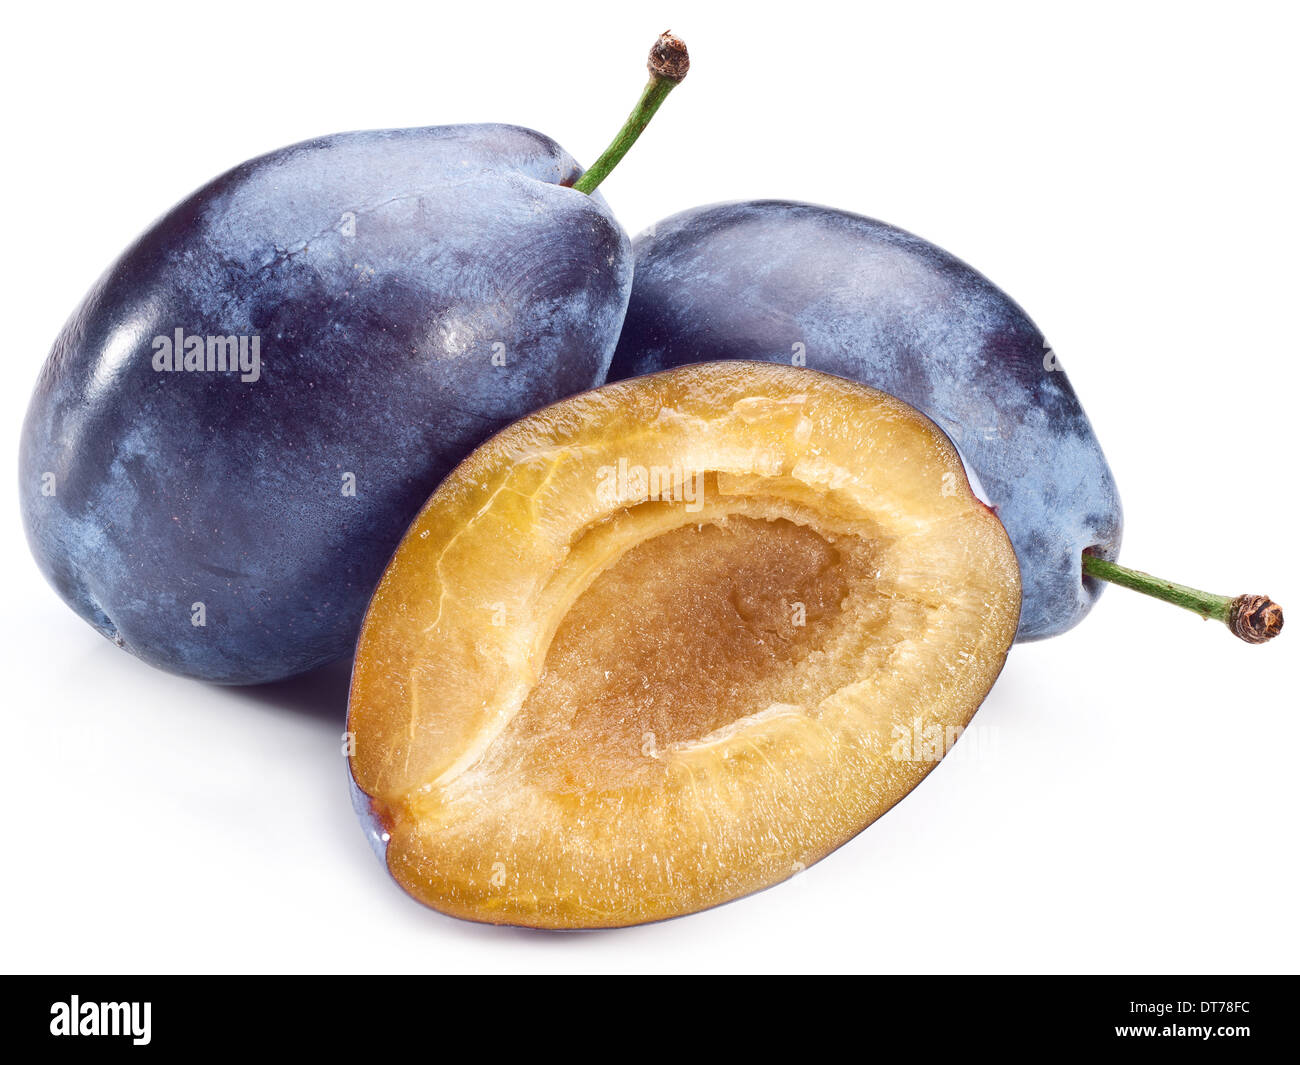 Plums with half of one isolated on a white background. Stock Photo